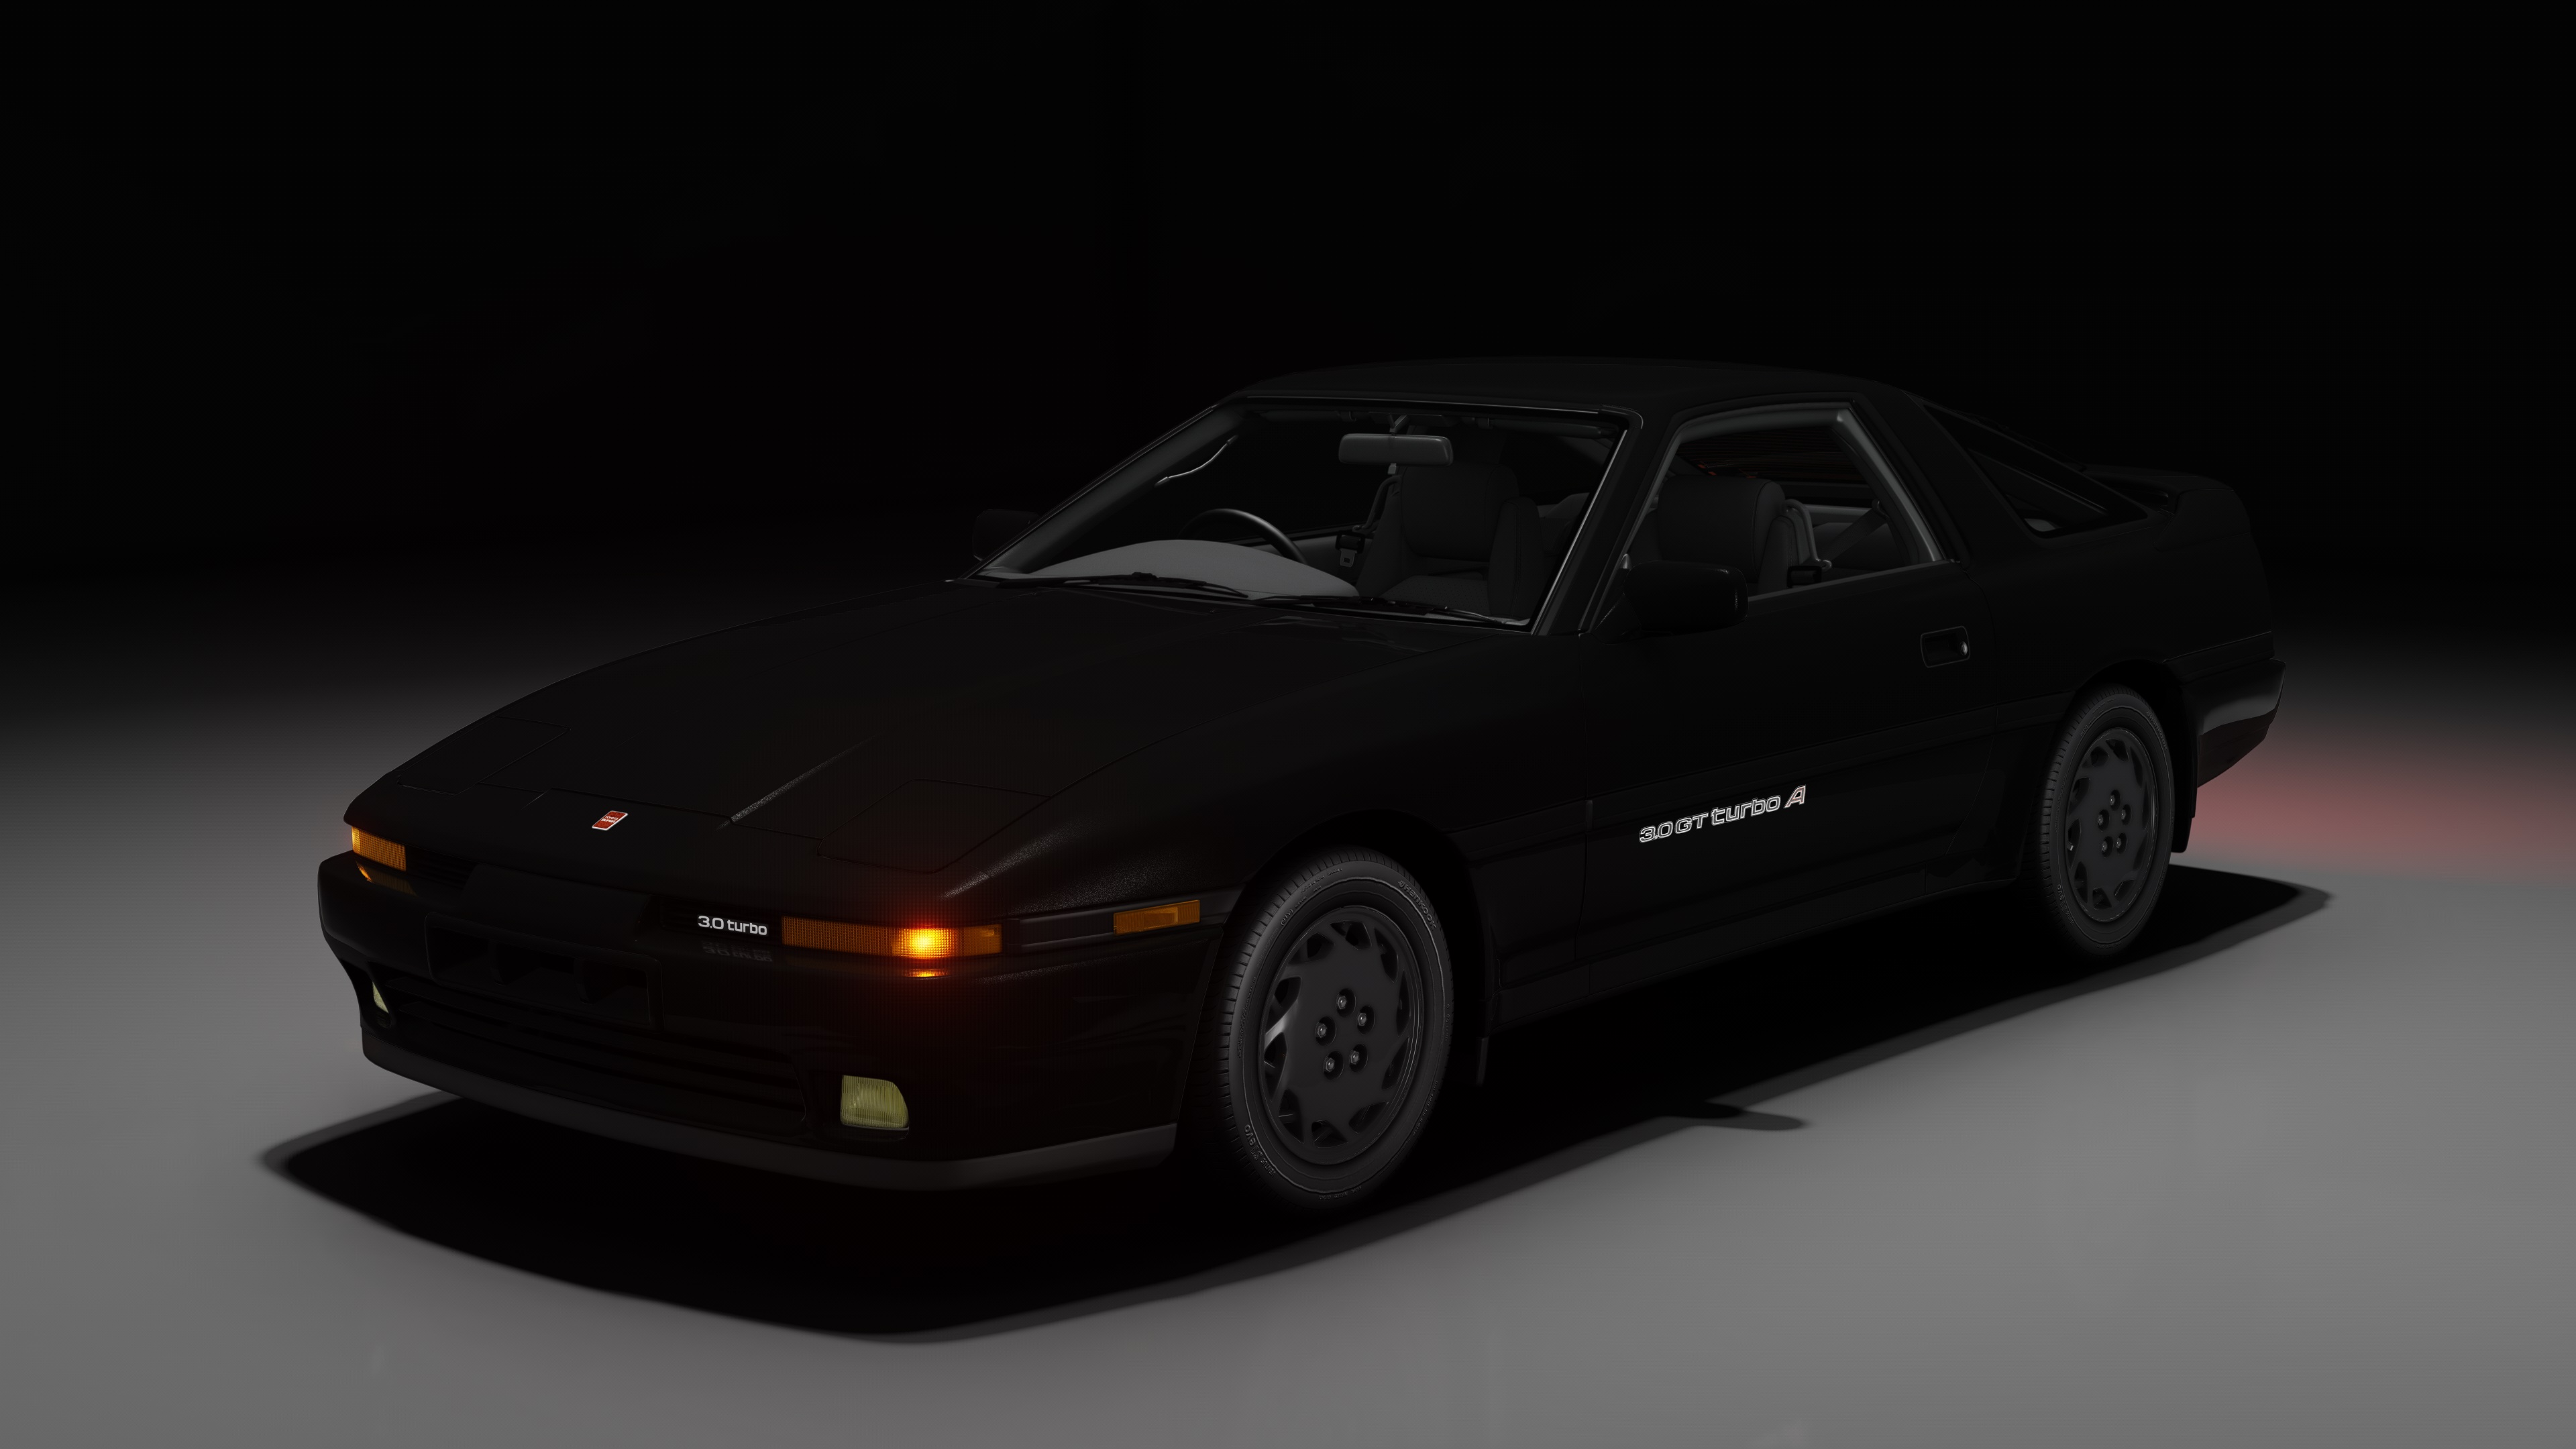 Toyota Supra 3.0GT Turbo A Preview Image